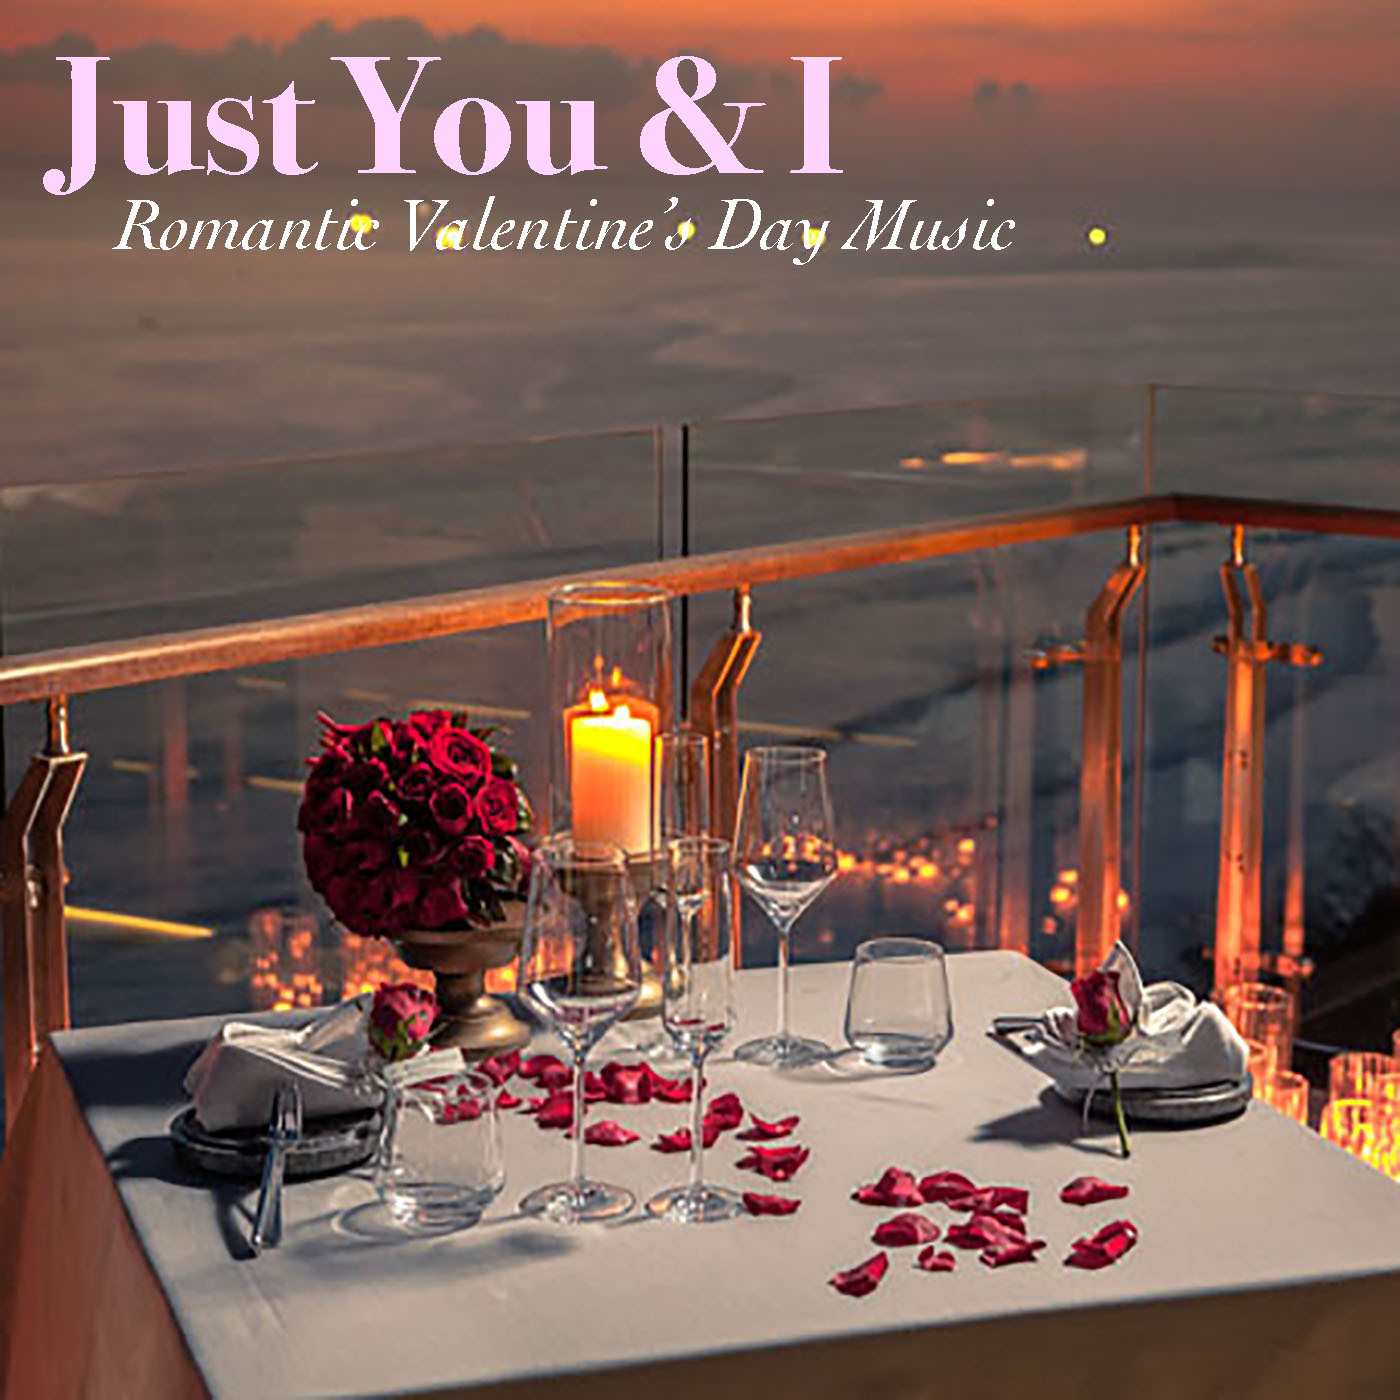 Just You & I: Romantic Valentine's Day Music